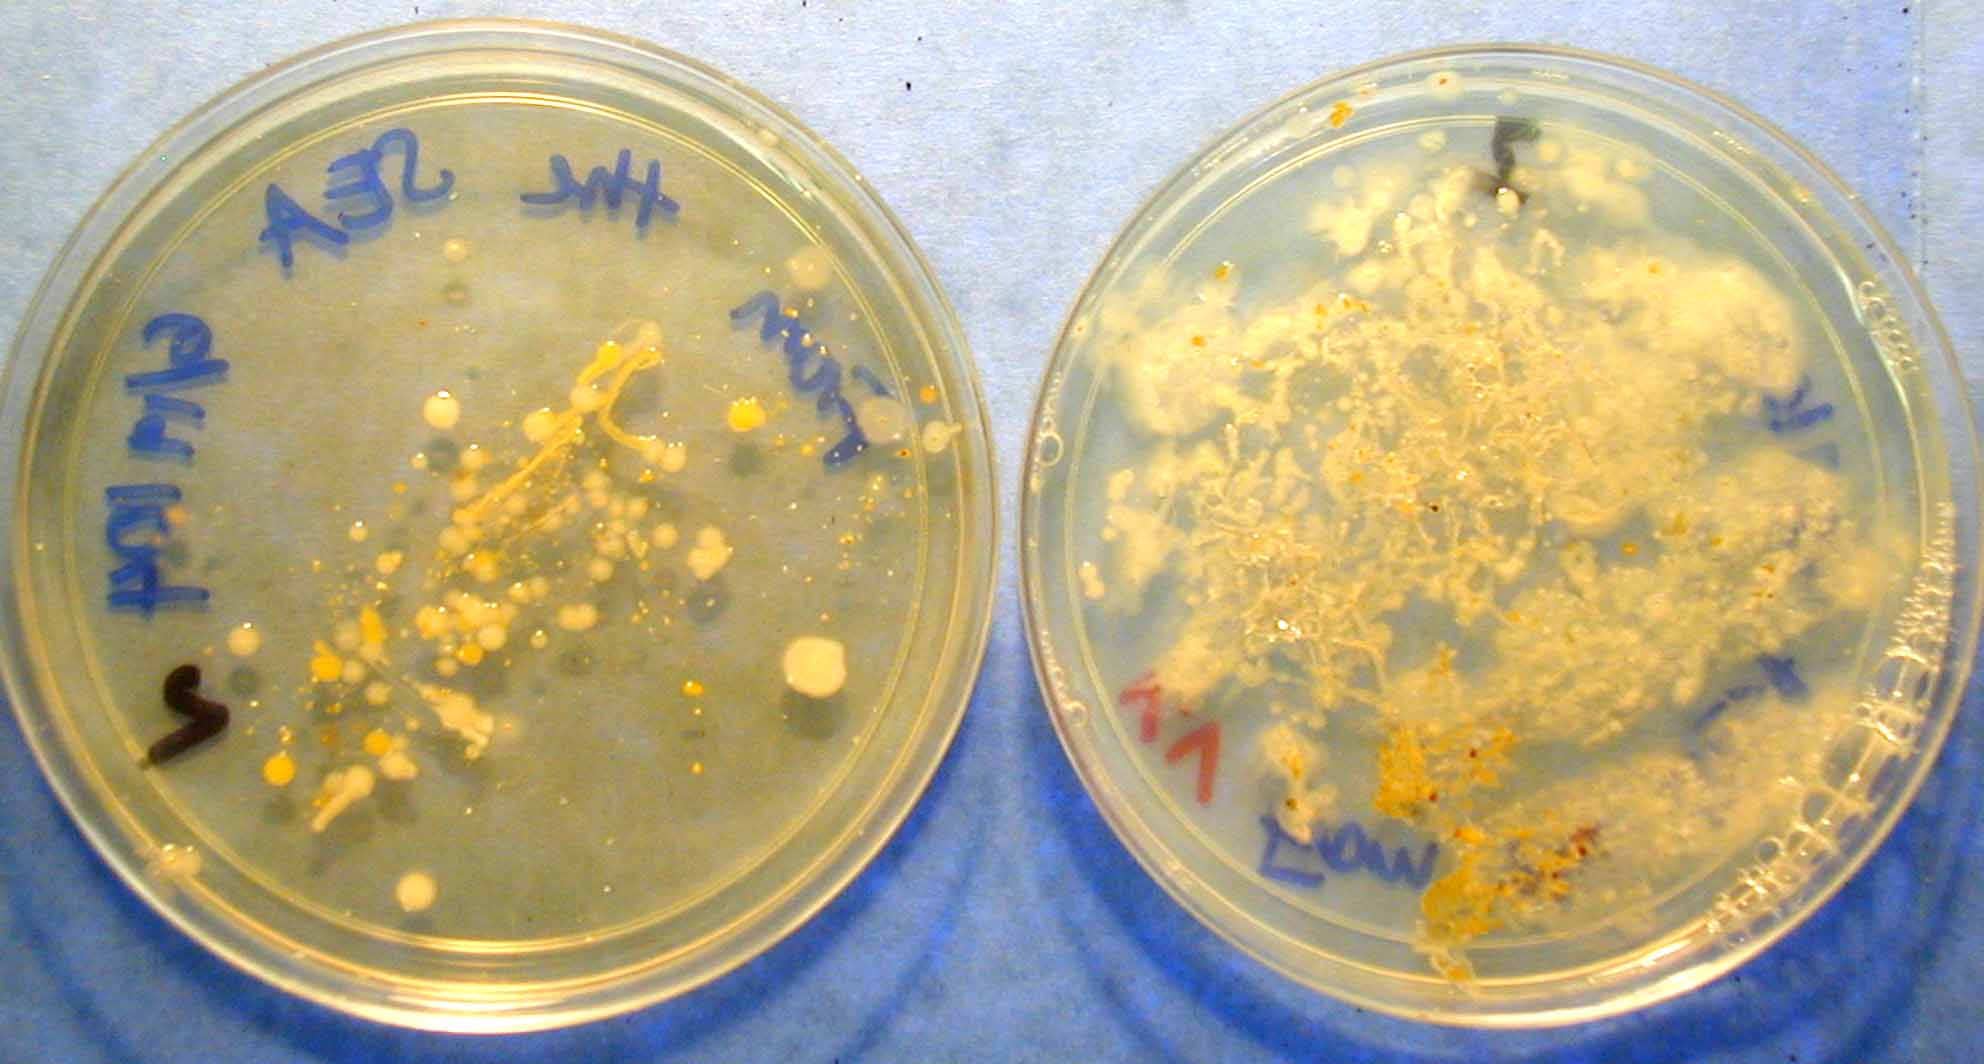 From the sea bacteria growing on land and sea food.